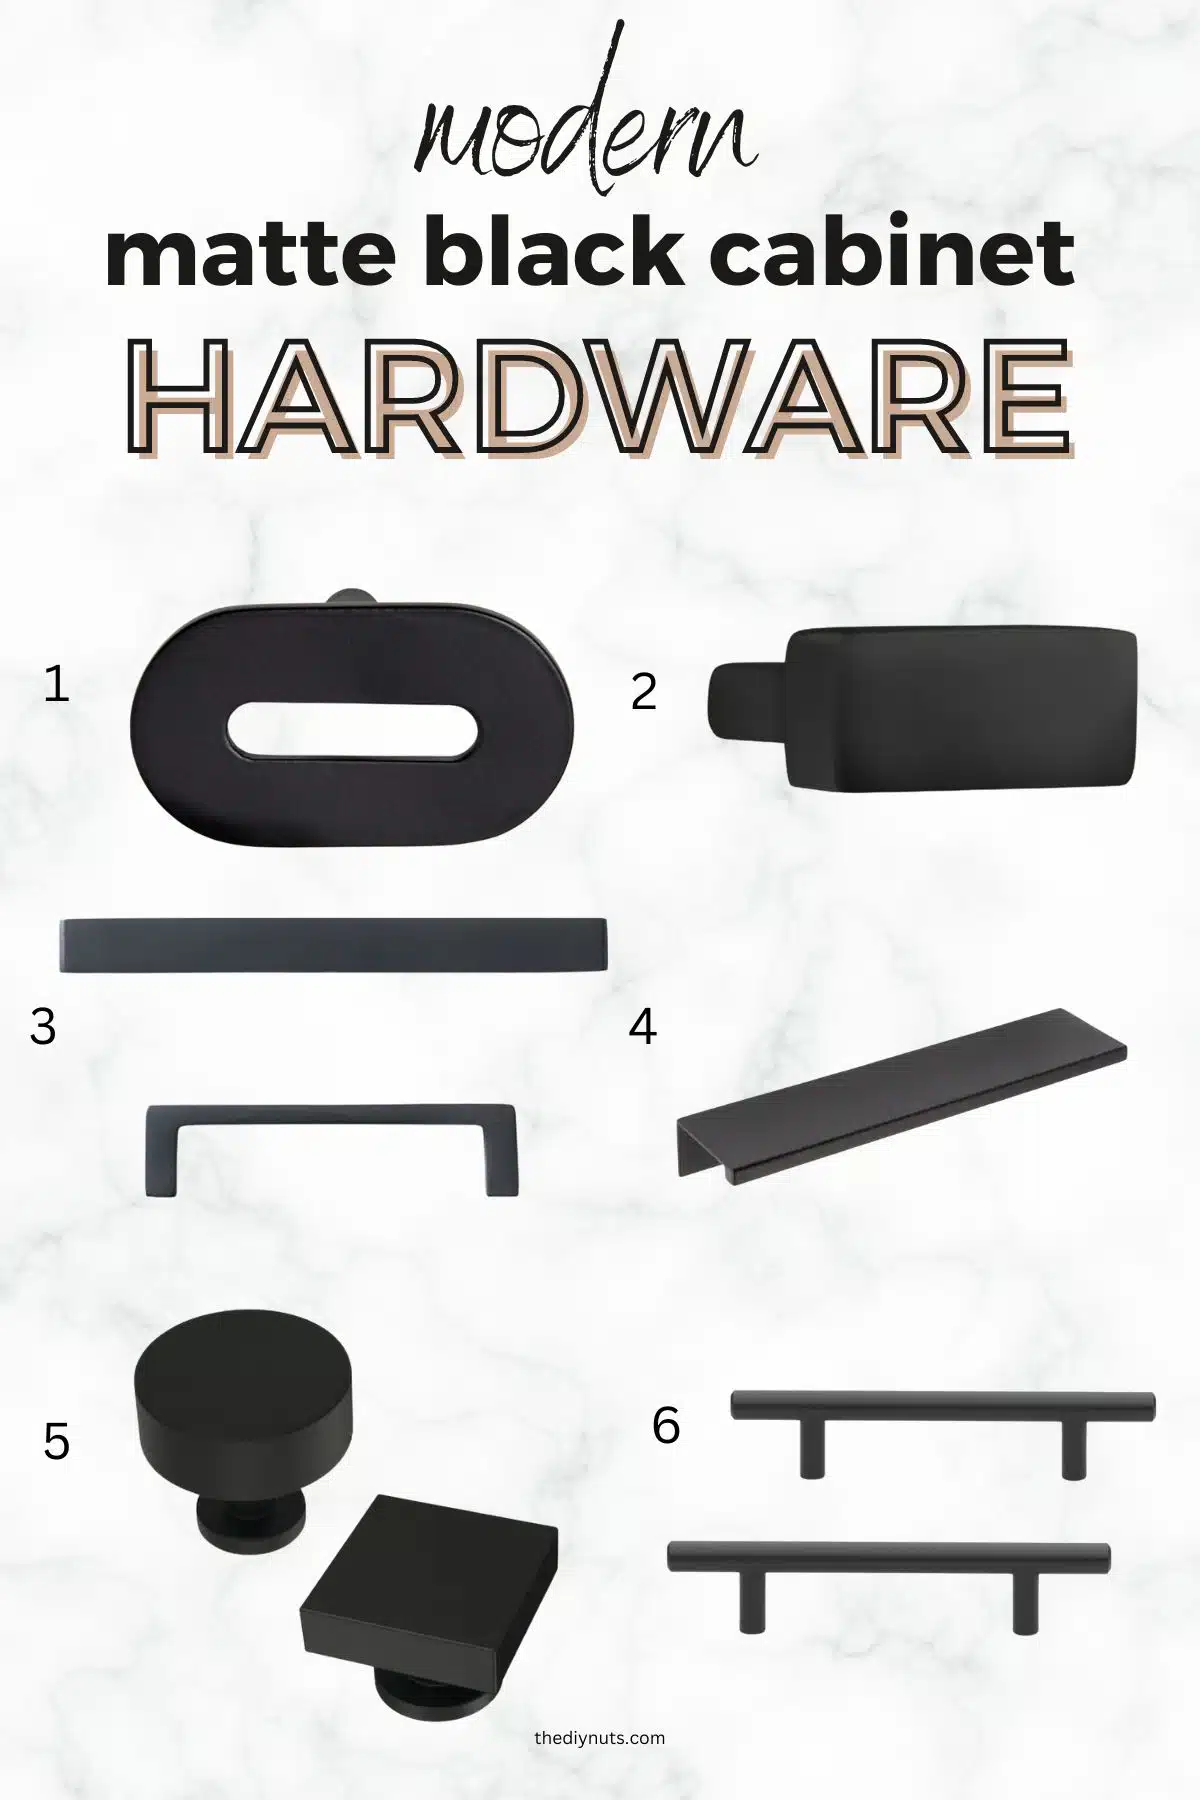 collage of black hardware pulls, knobs and handles with text modern matter black cabinet hardware.